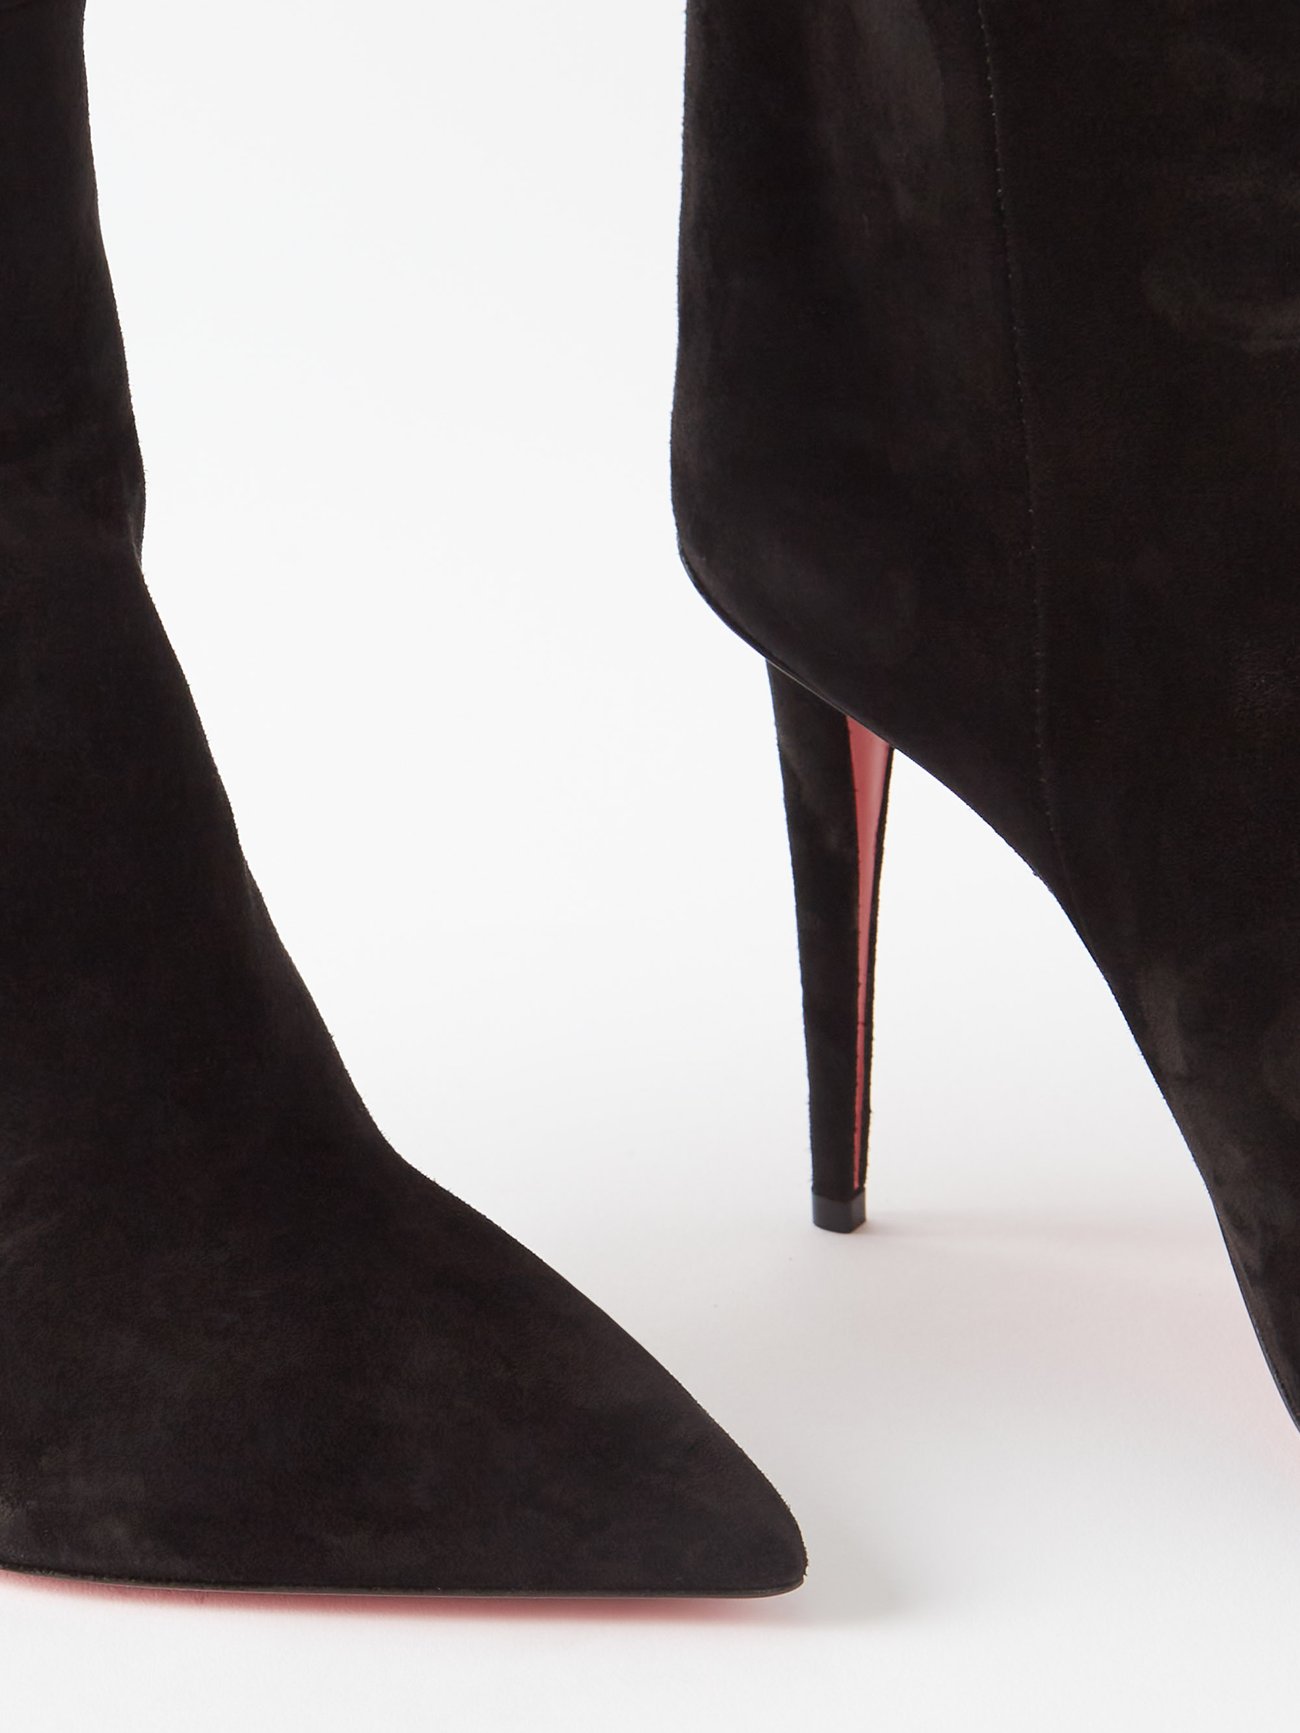 Christian Louboutin Astrilarge Knee High Pointed Toe Boot